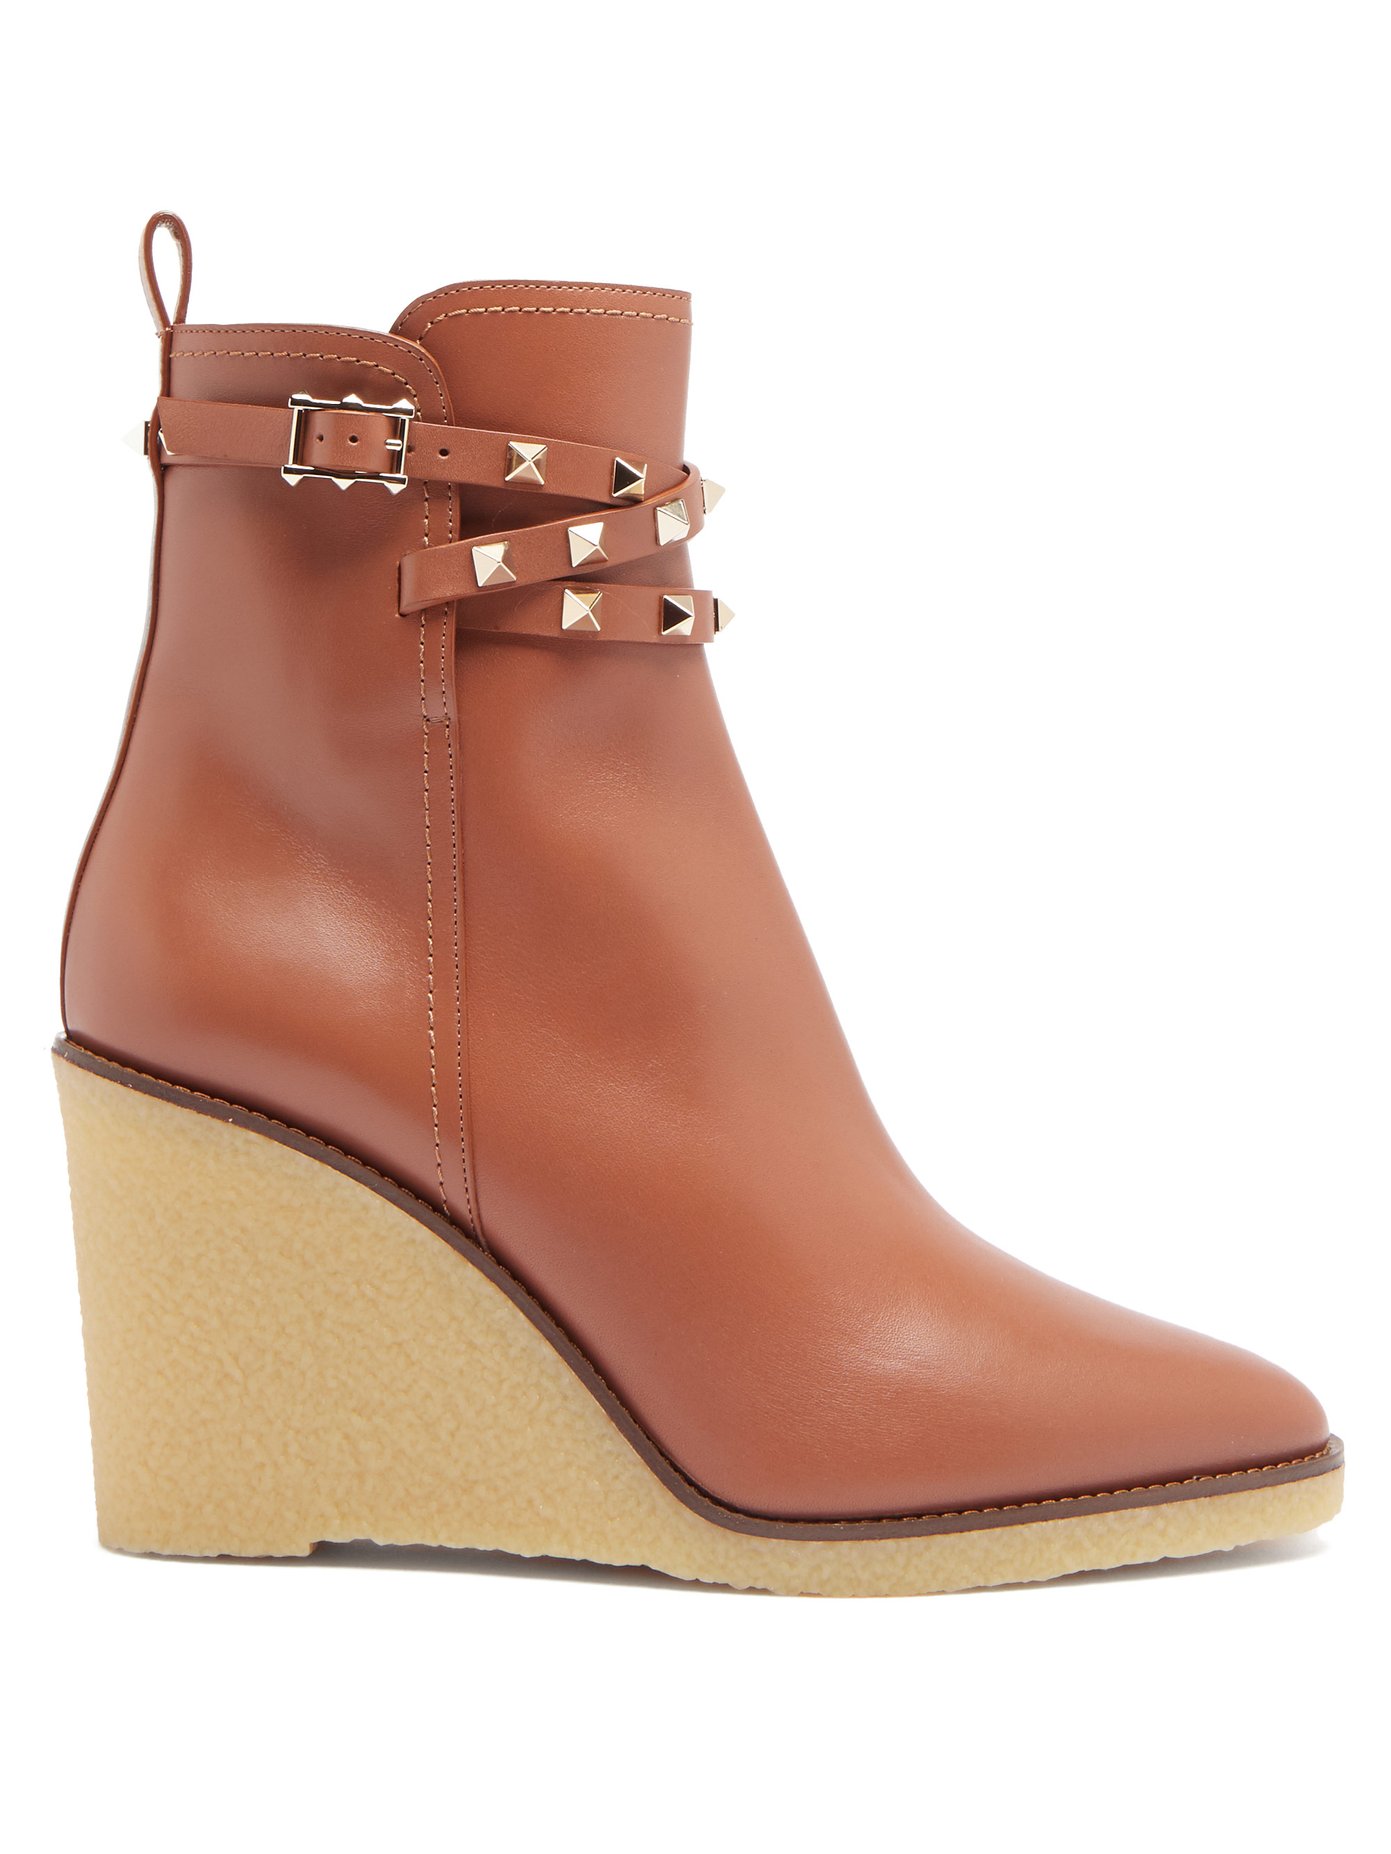 tan wedge boots